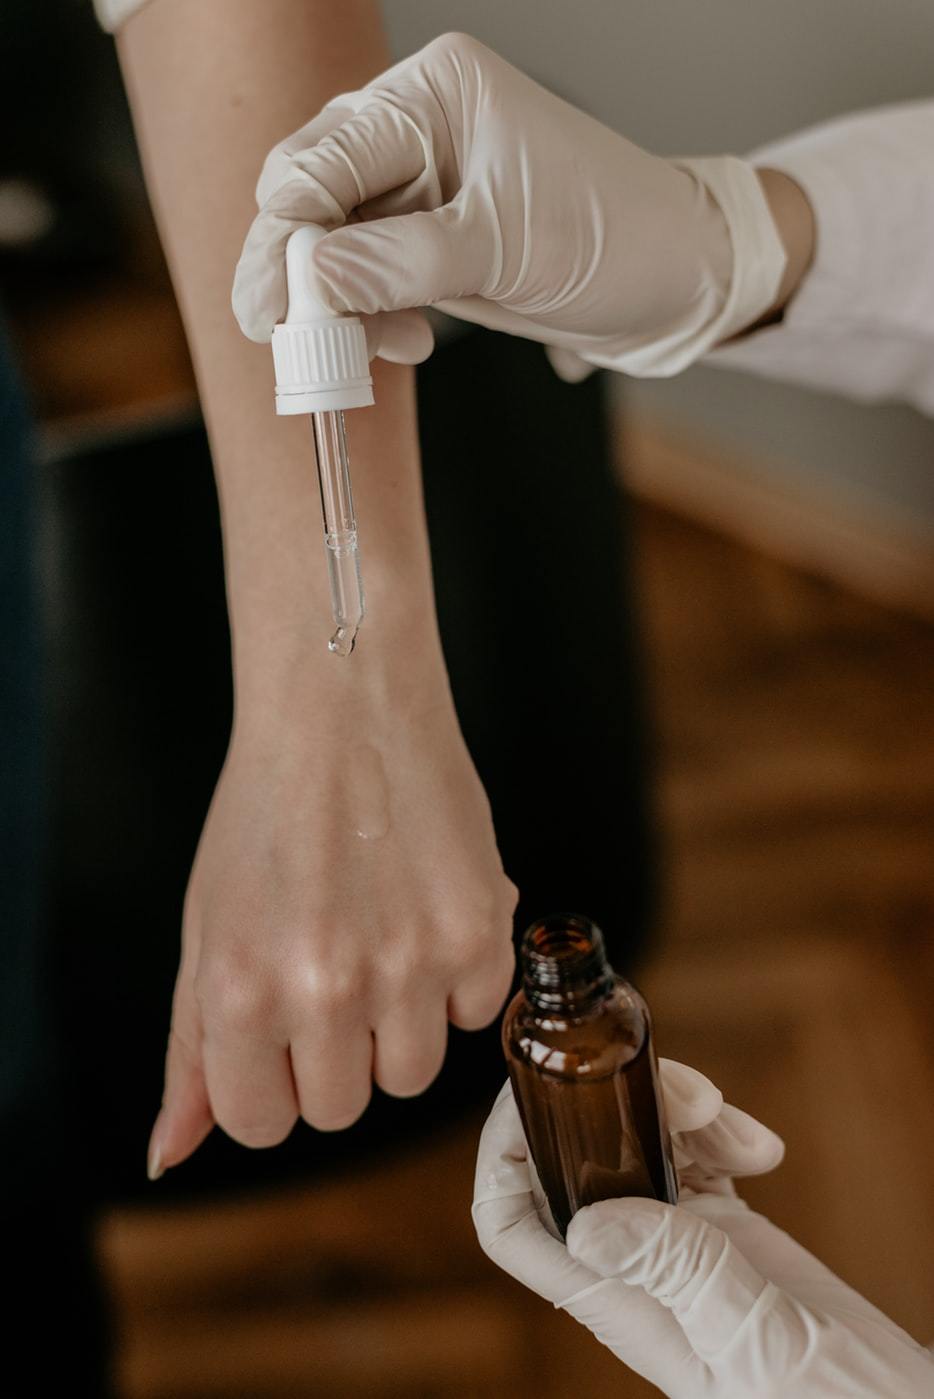 picture of a woman applying essential oils and cosmetics to another woman's hand